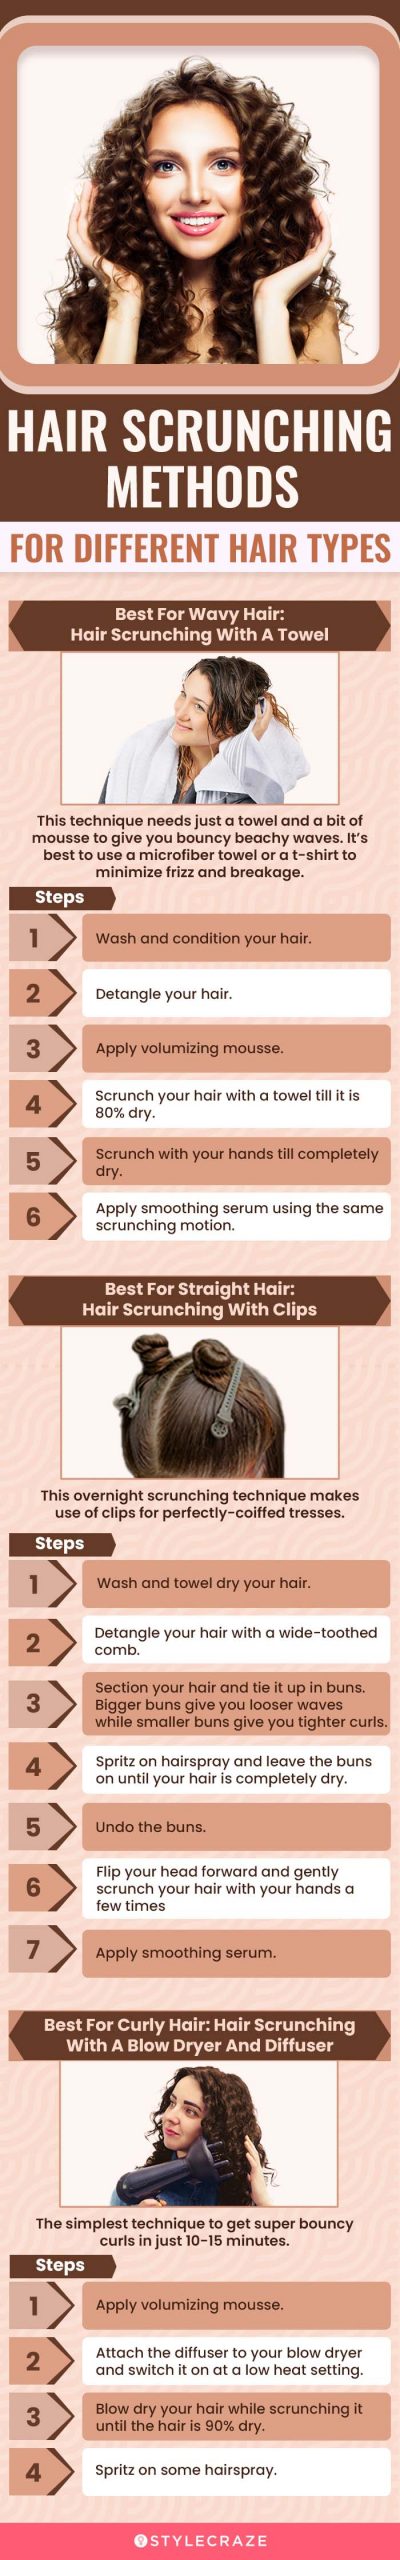 hair scrunching methods for different hair types (infographic)